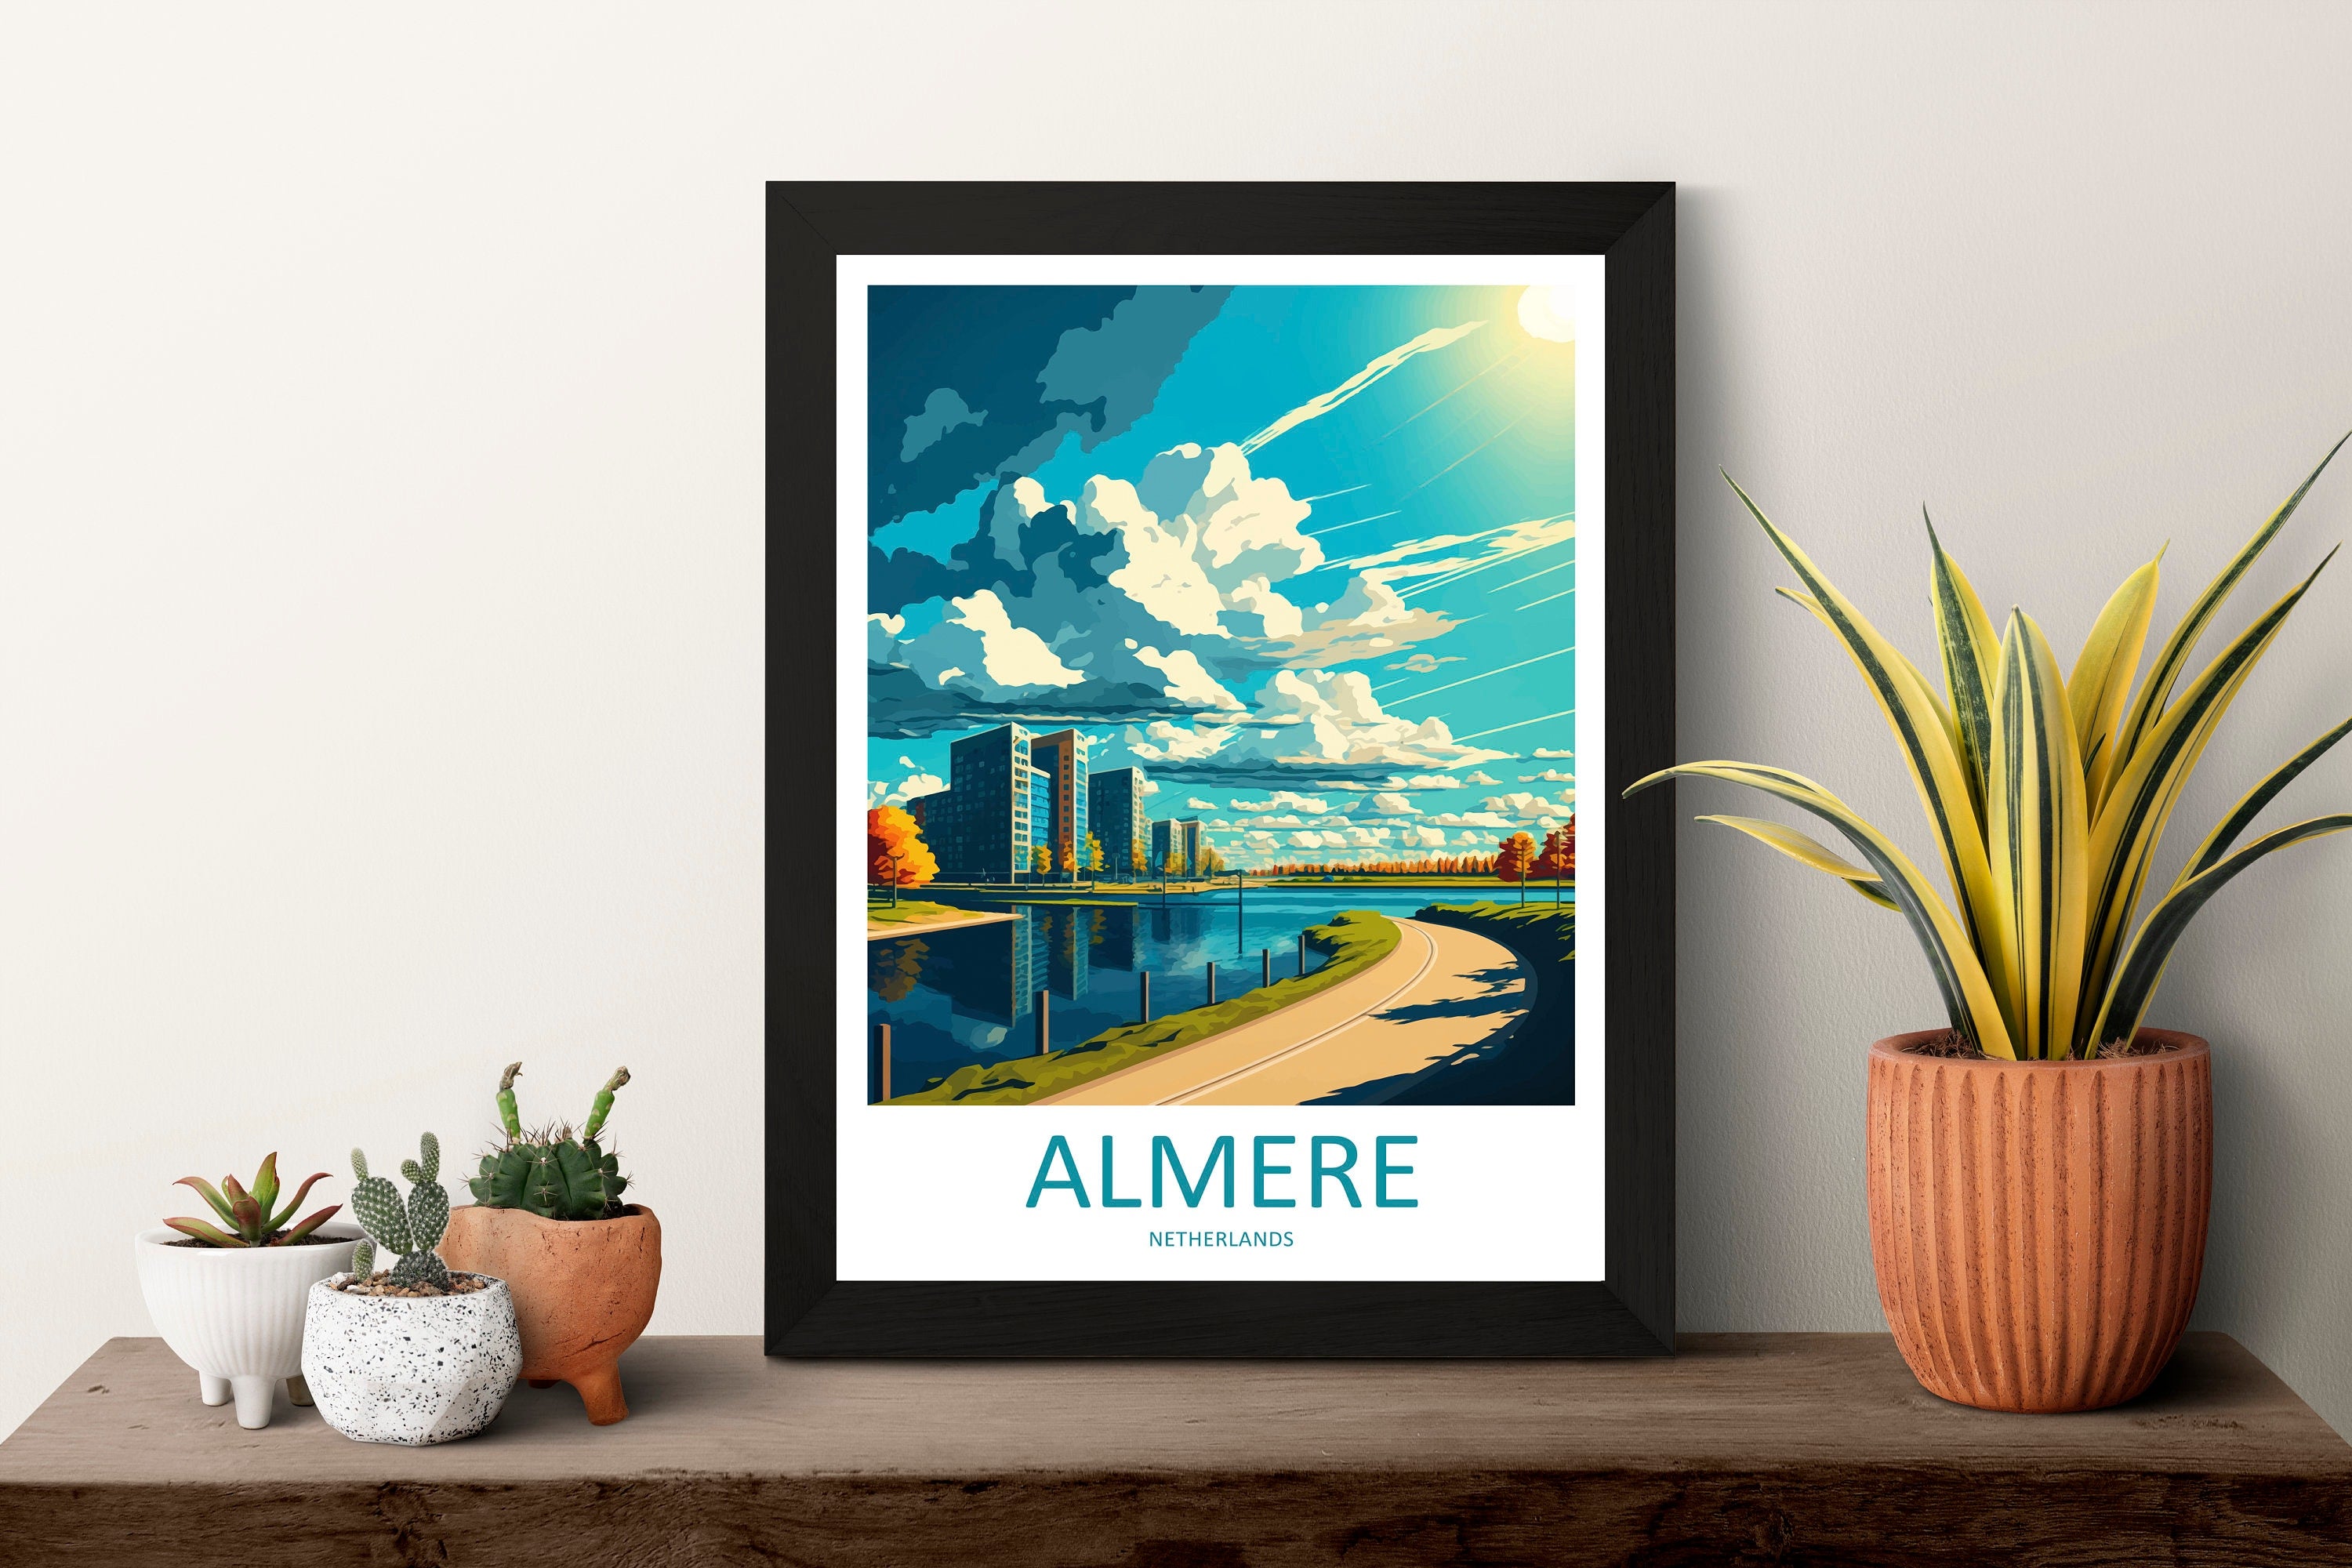 Almere Travel Print Wall Art Almere Wall Hanging Home Décor Almere Gift Art Lovers Netherlands Art Lover Gift Almere Travel Art